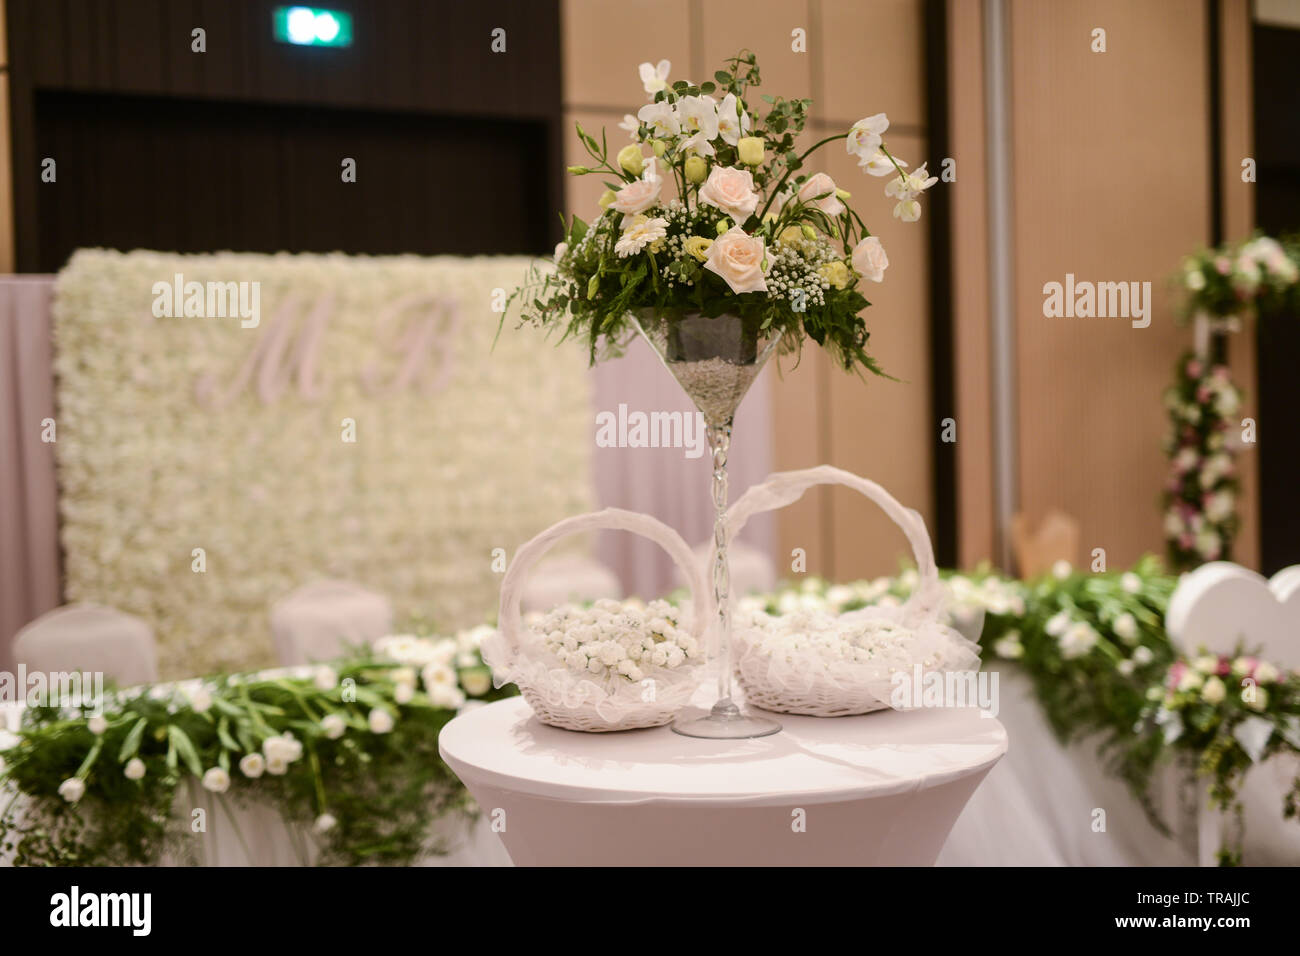 Beautiful decoration for a special event Stock Photo